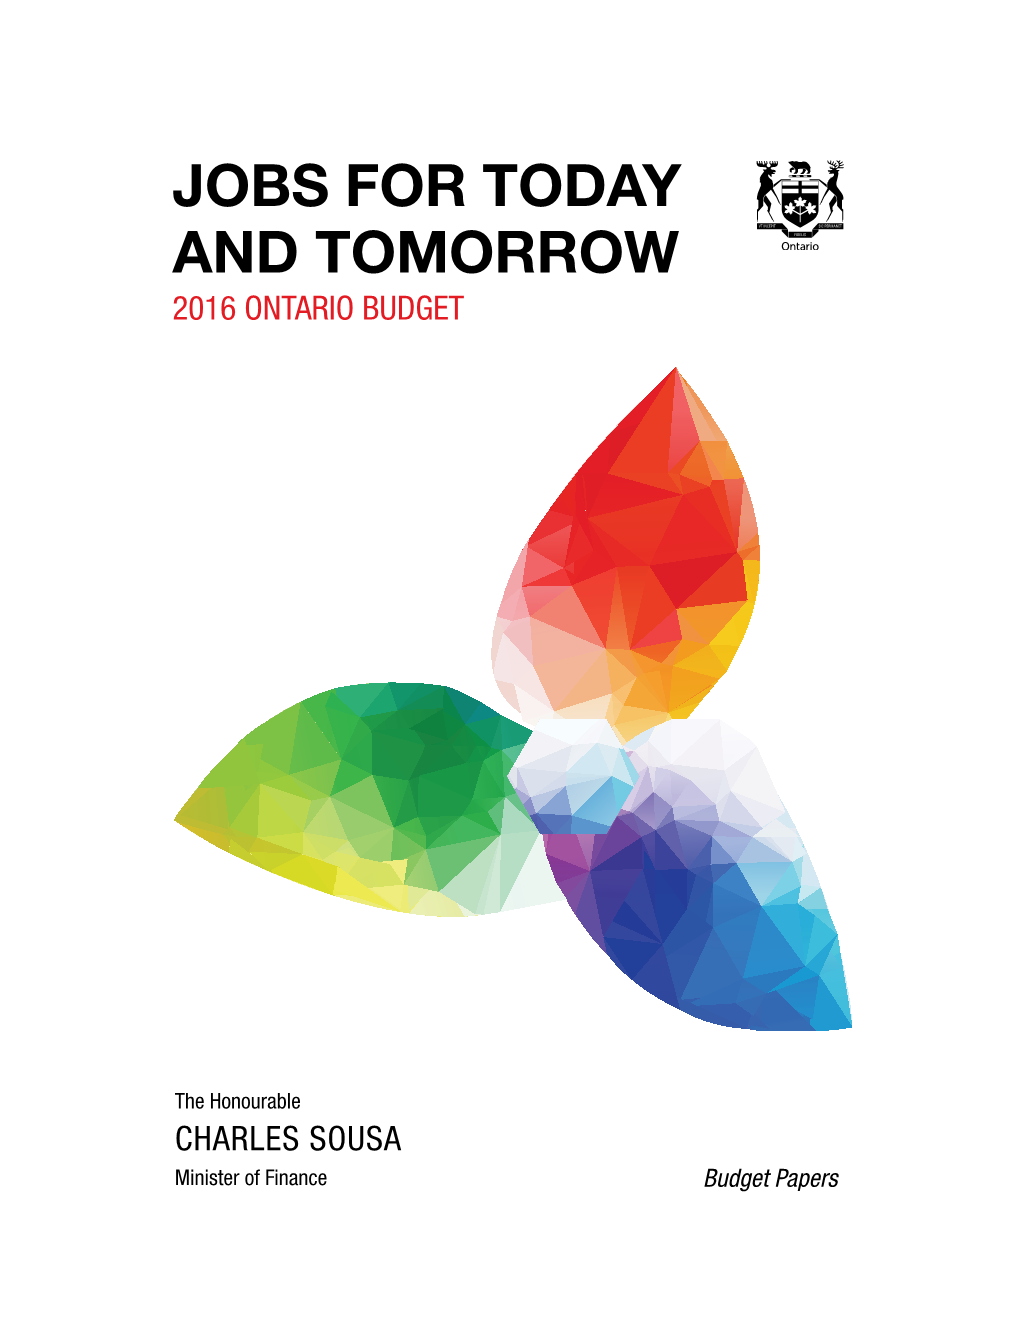 Jobs for Today and Tomorrow 2016 Ontario Budget